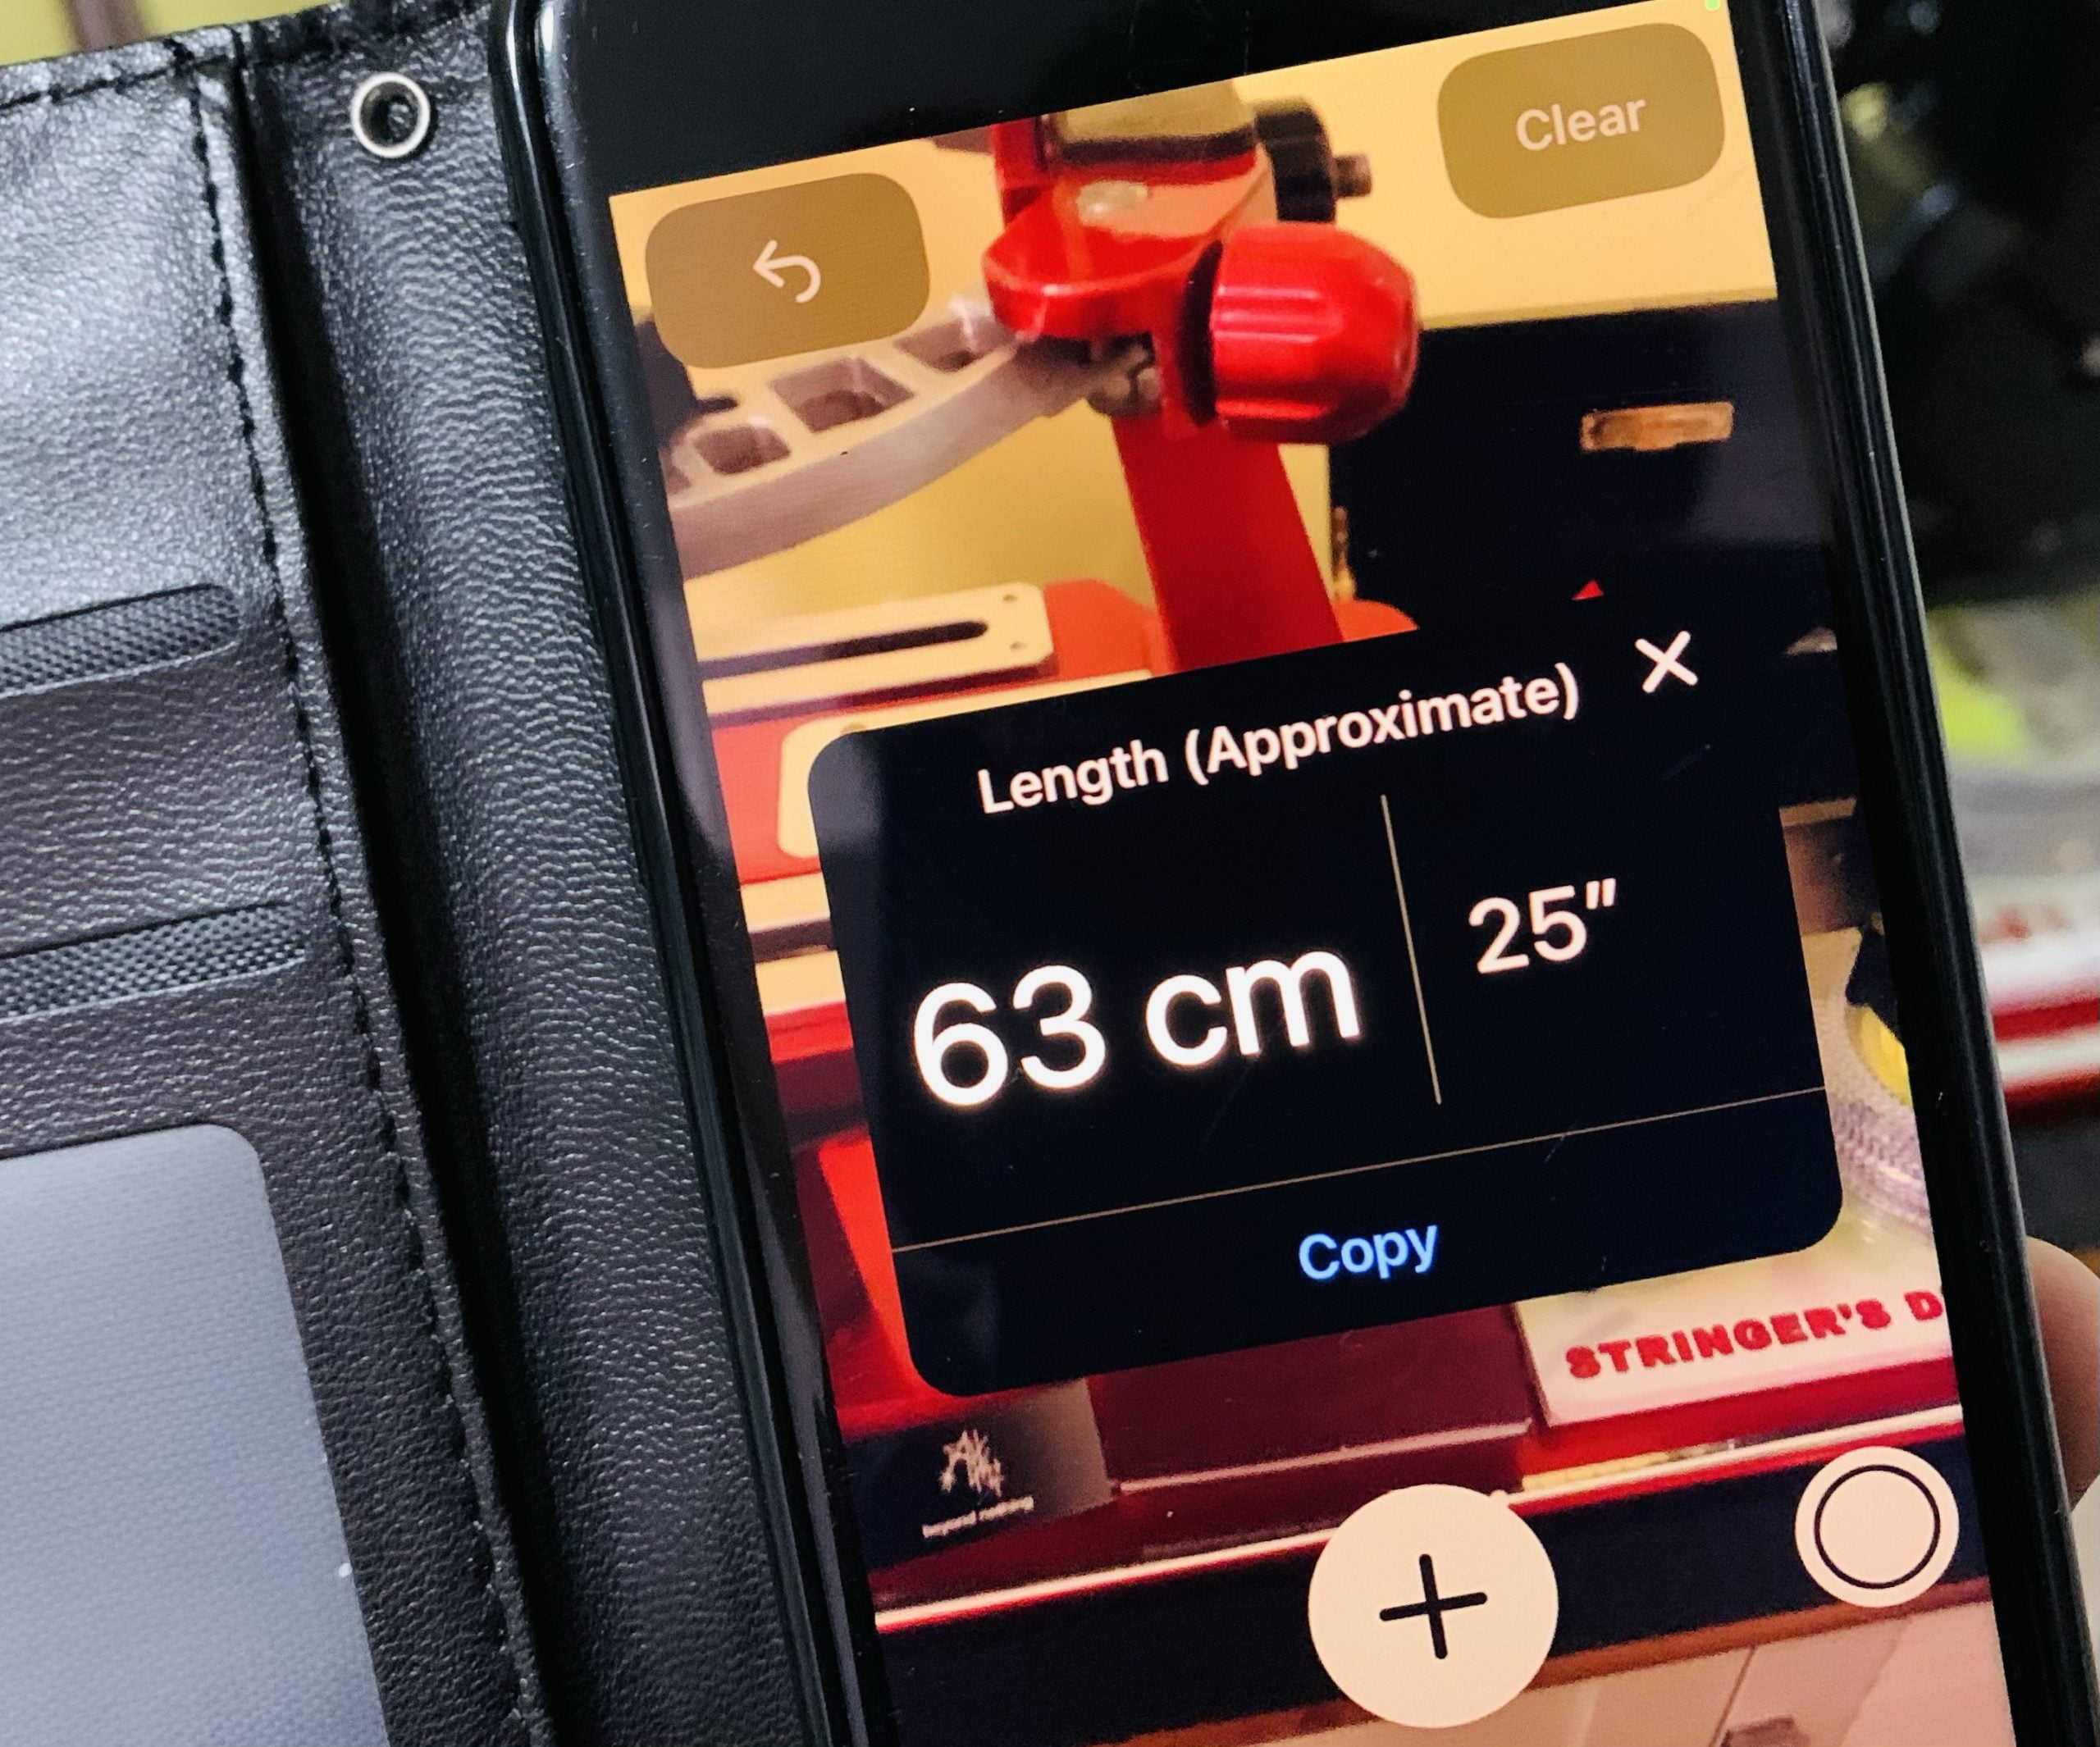 How to measure length or distance using an iPhone or iPad